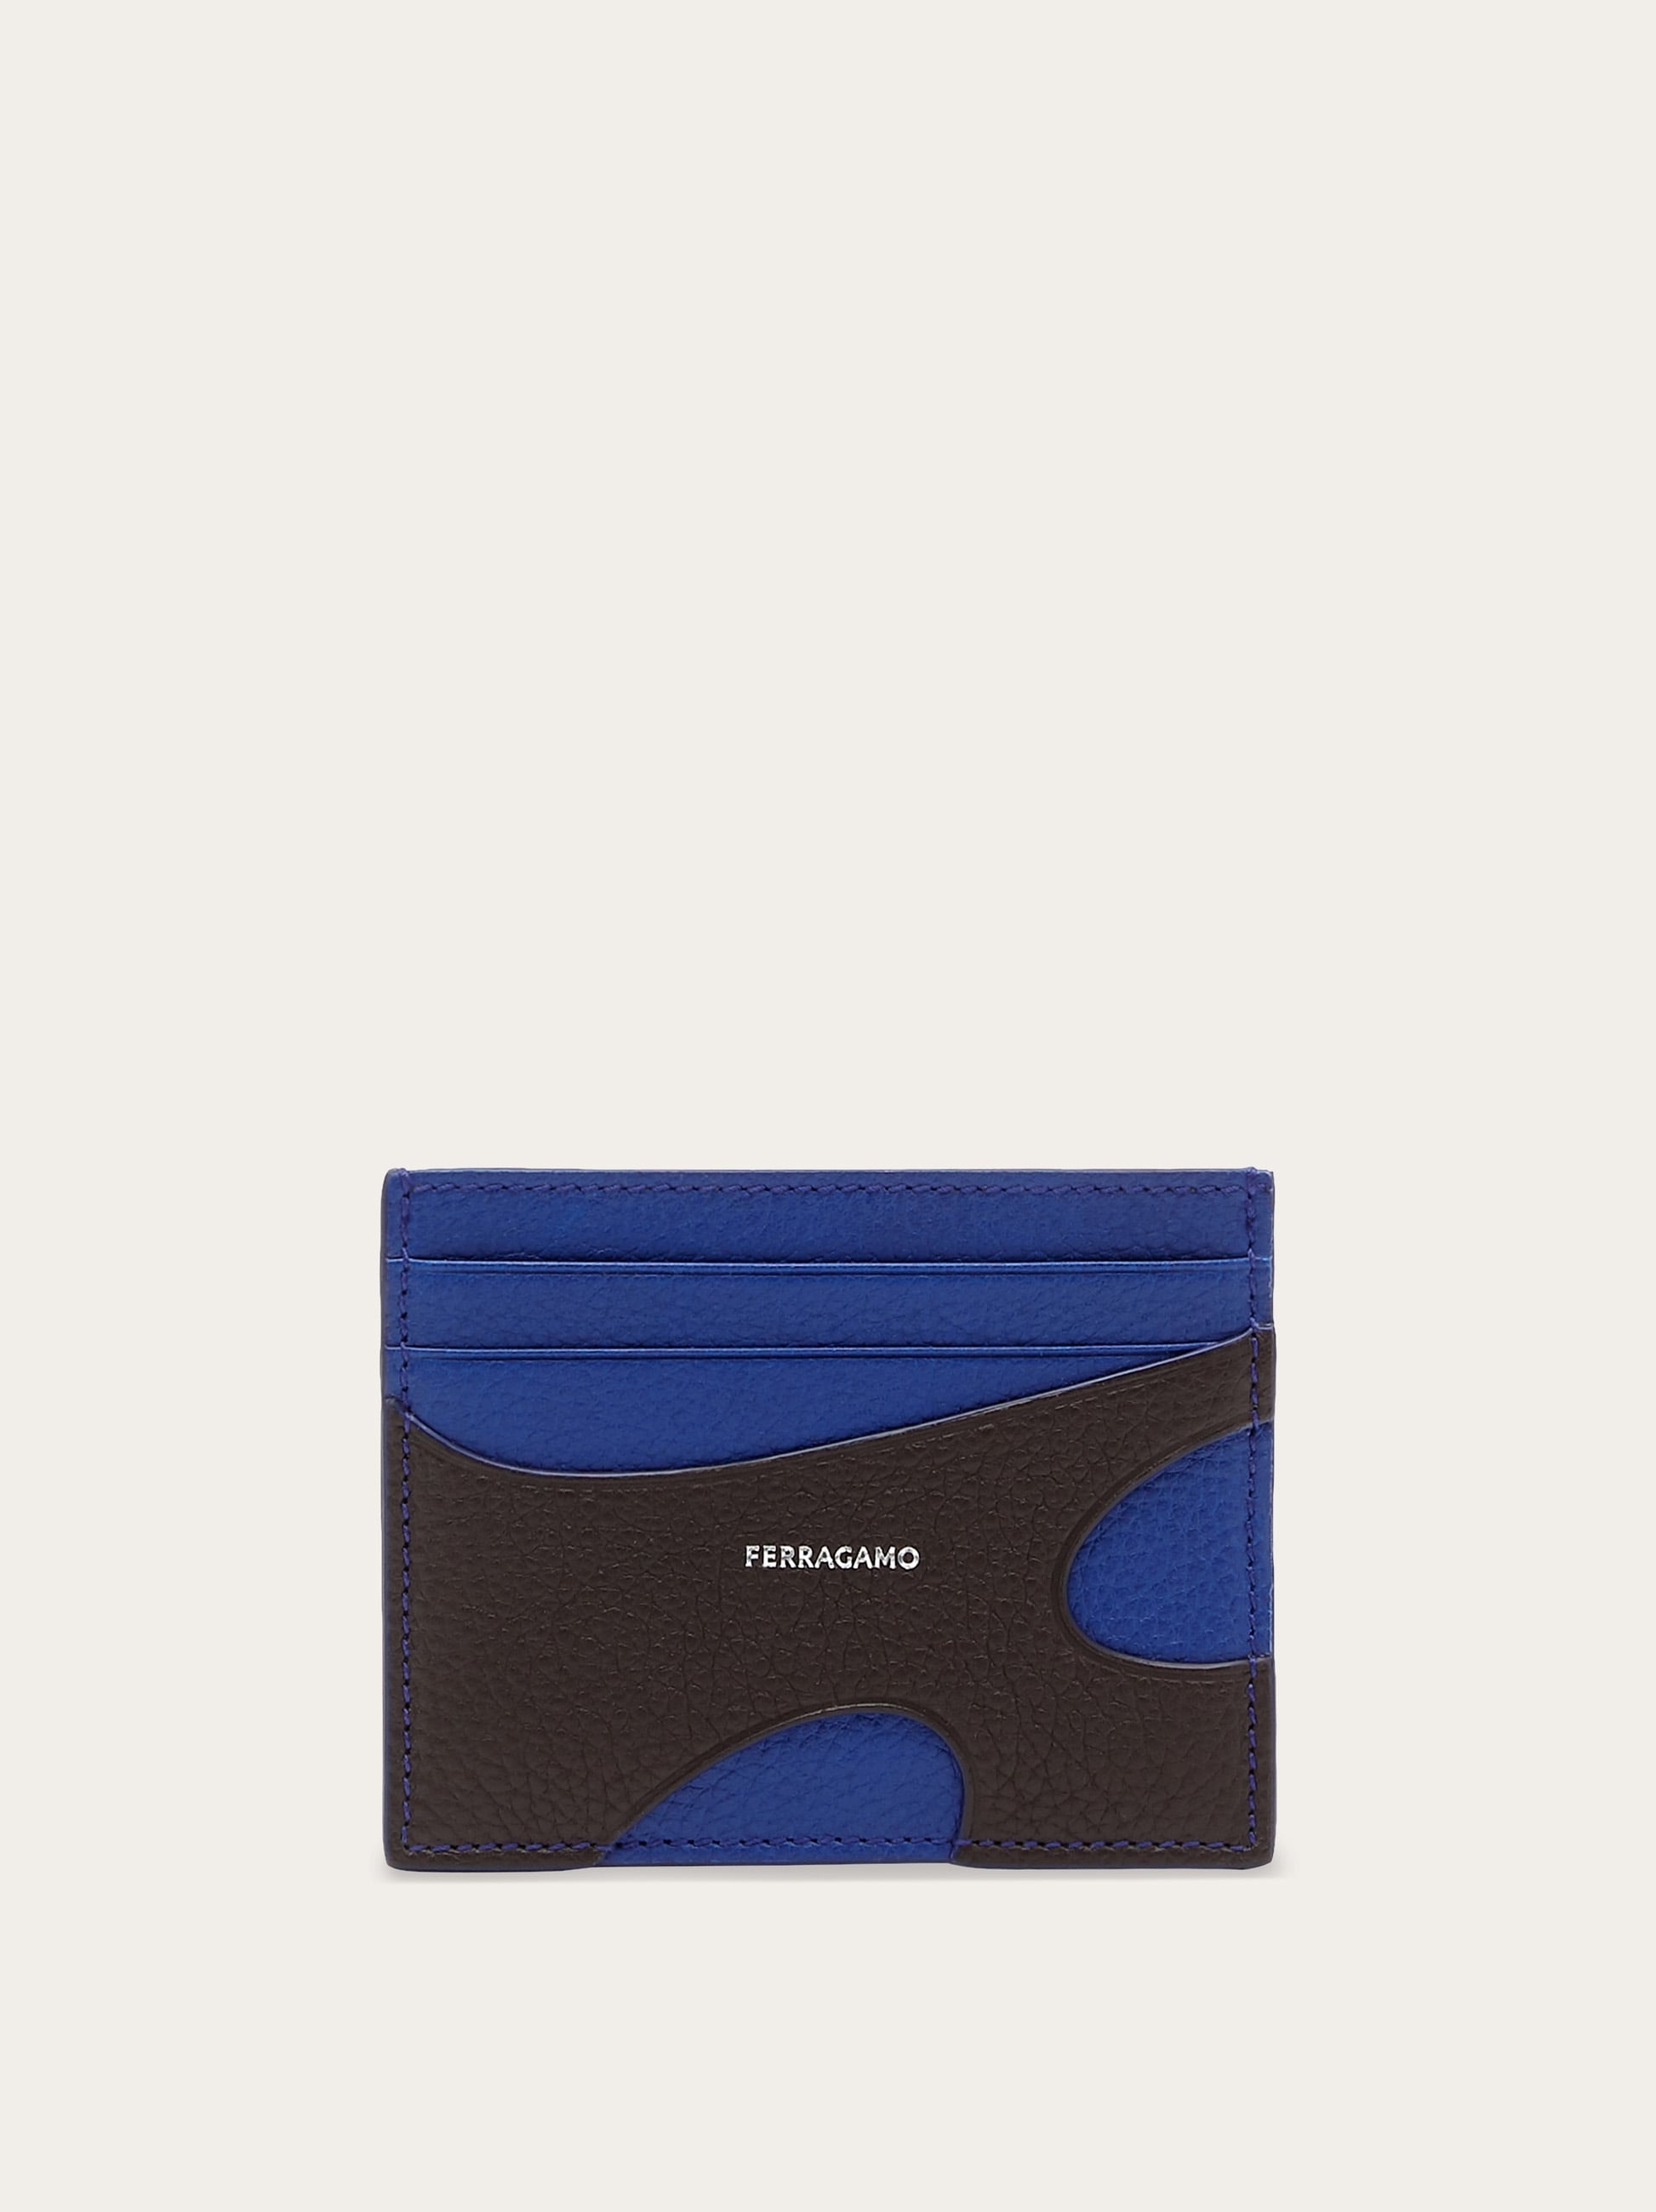 Cut out credit card holder - 1